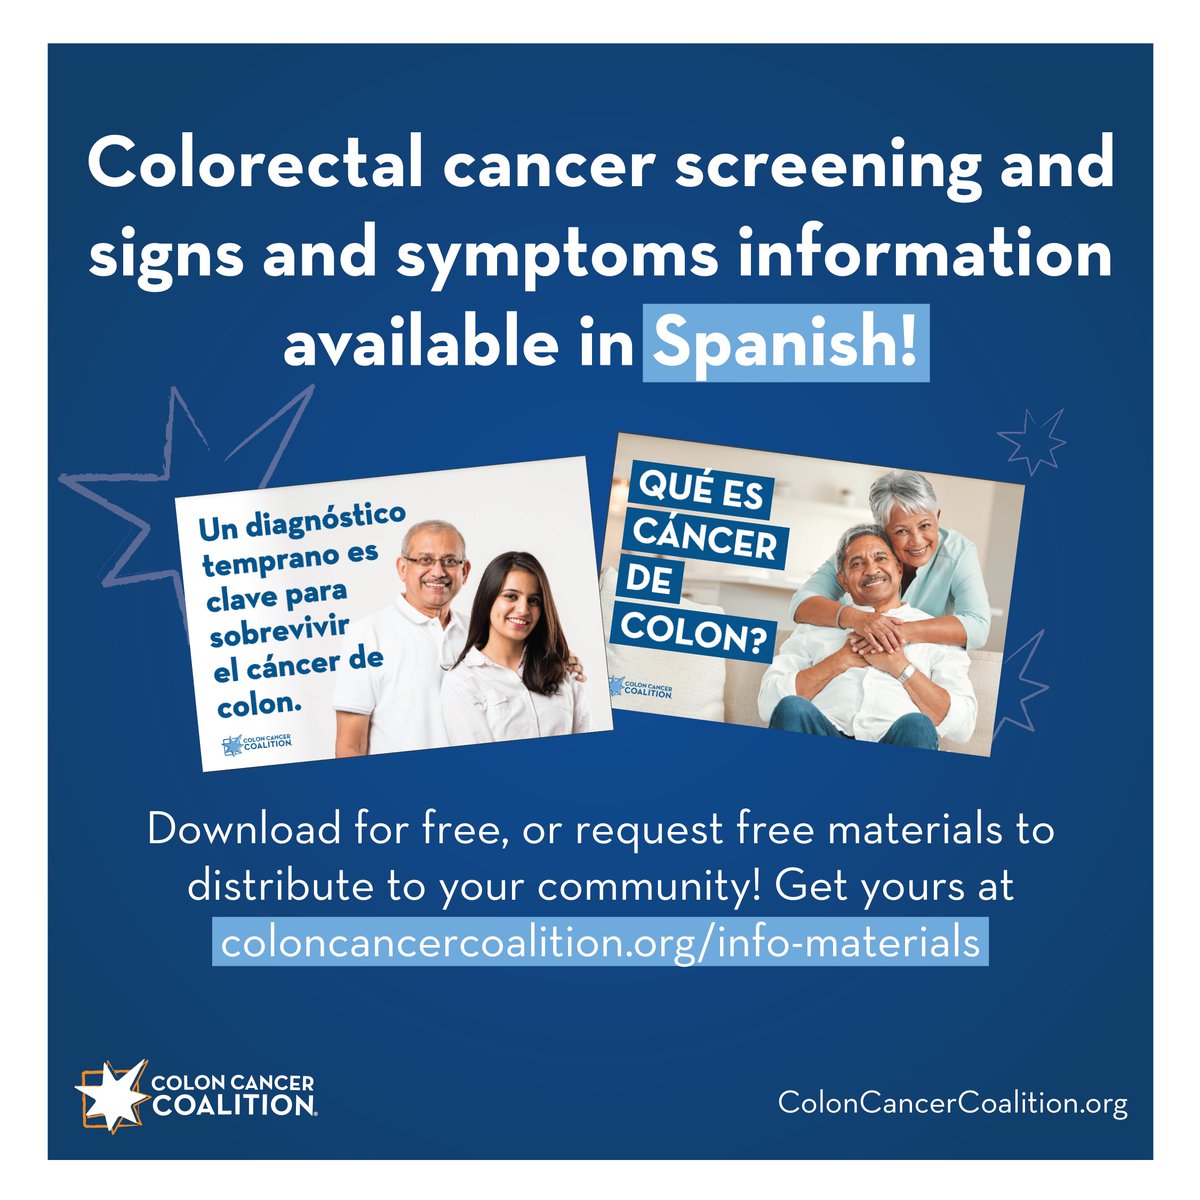 Are you a healthcare professional? Are your patients primarily spanish-speakers? Our materials are now fully translated to Spanish and are FREE for your clinic! Click here to request yours today: coloncancercoalition.org/get-educated/i…